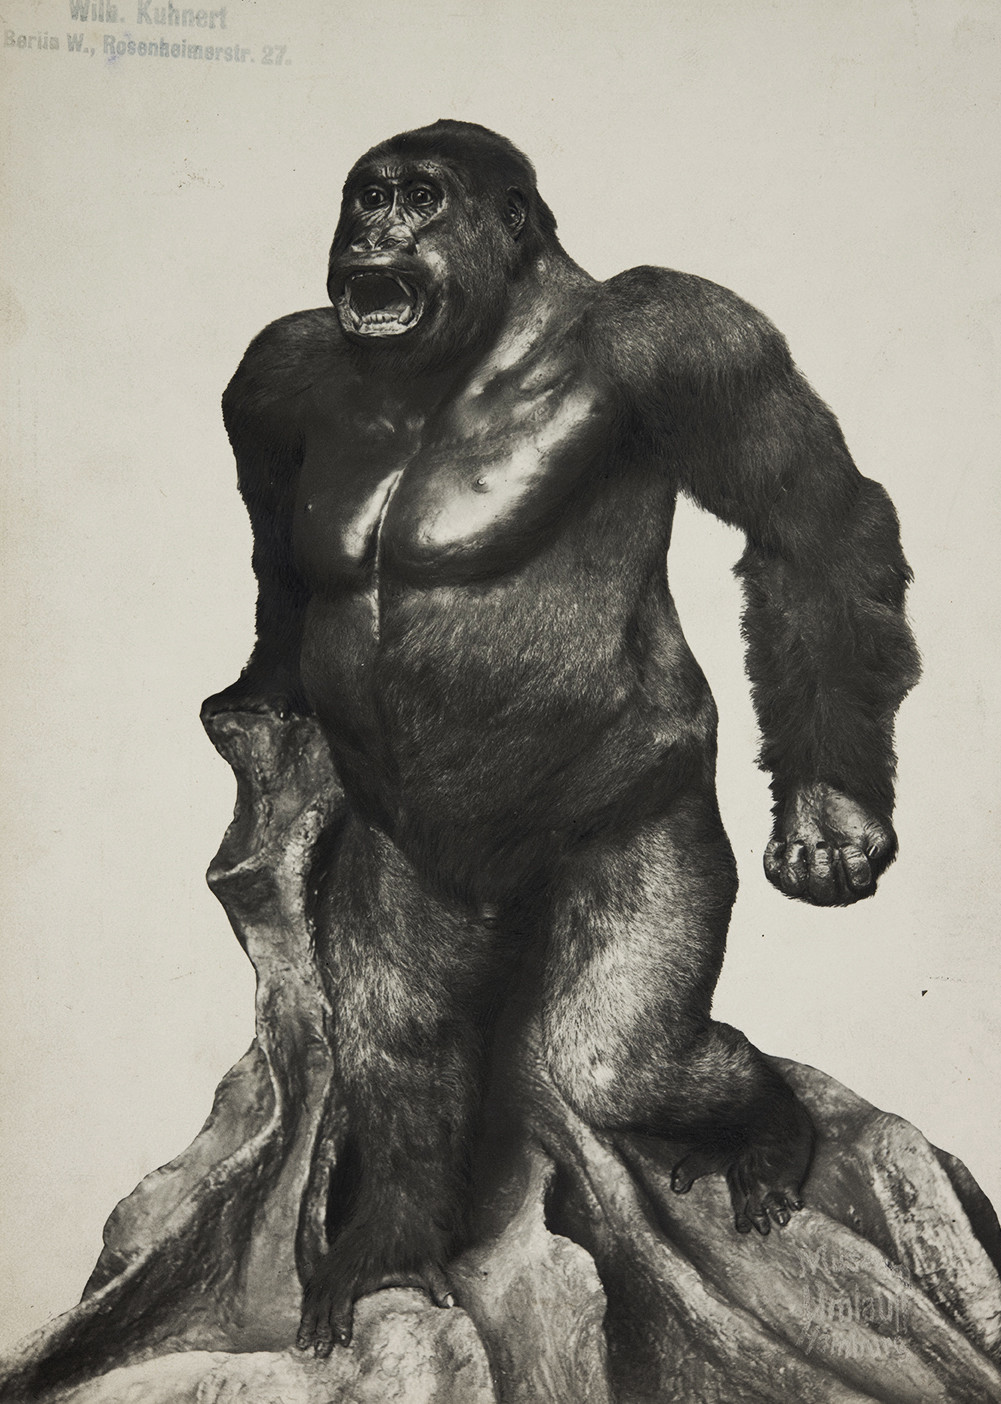 Black-and-white photograph of a dermoplastic gorilla taxidermy propped up on an artificial tree root, standing on two legs, with its mouth open as if to roar and its left hand balled into a fist.